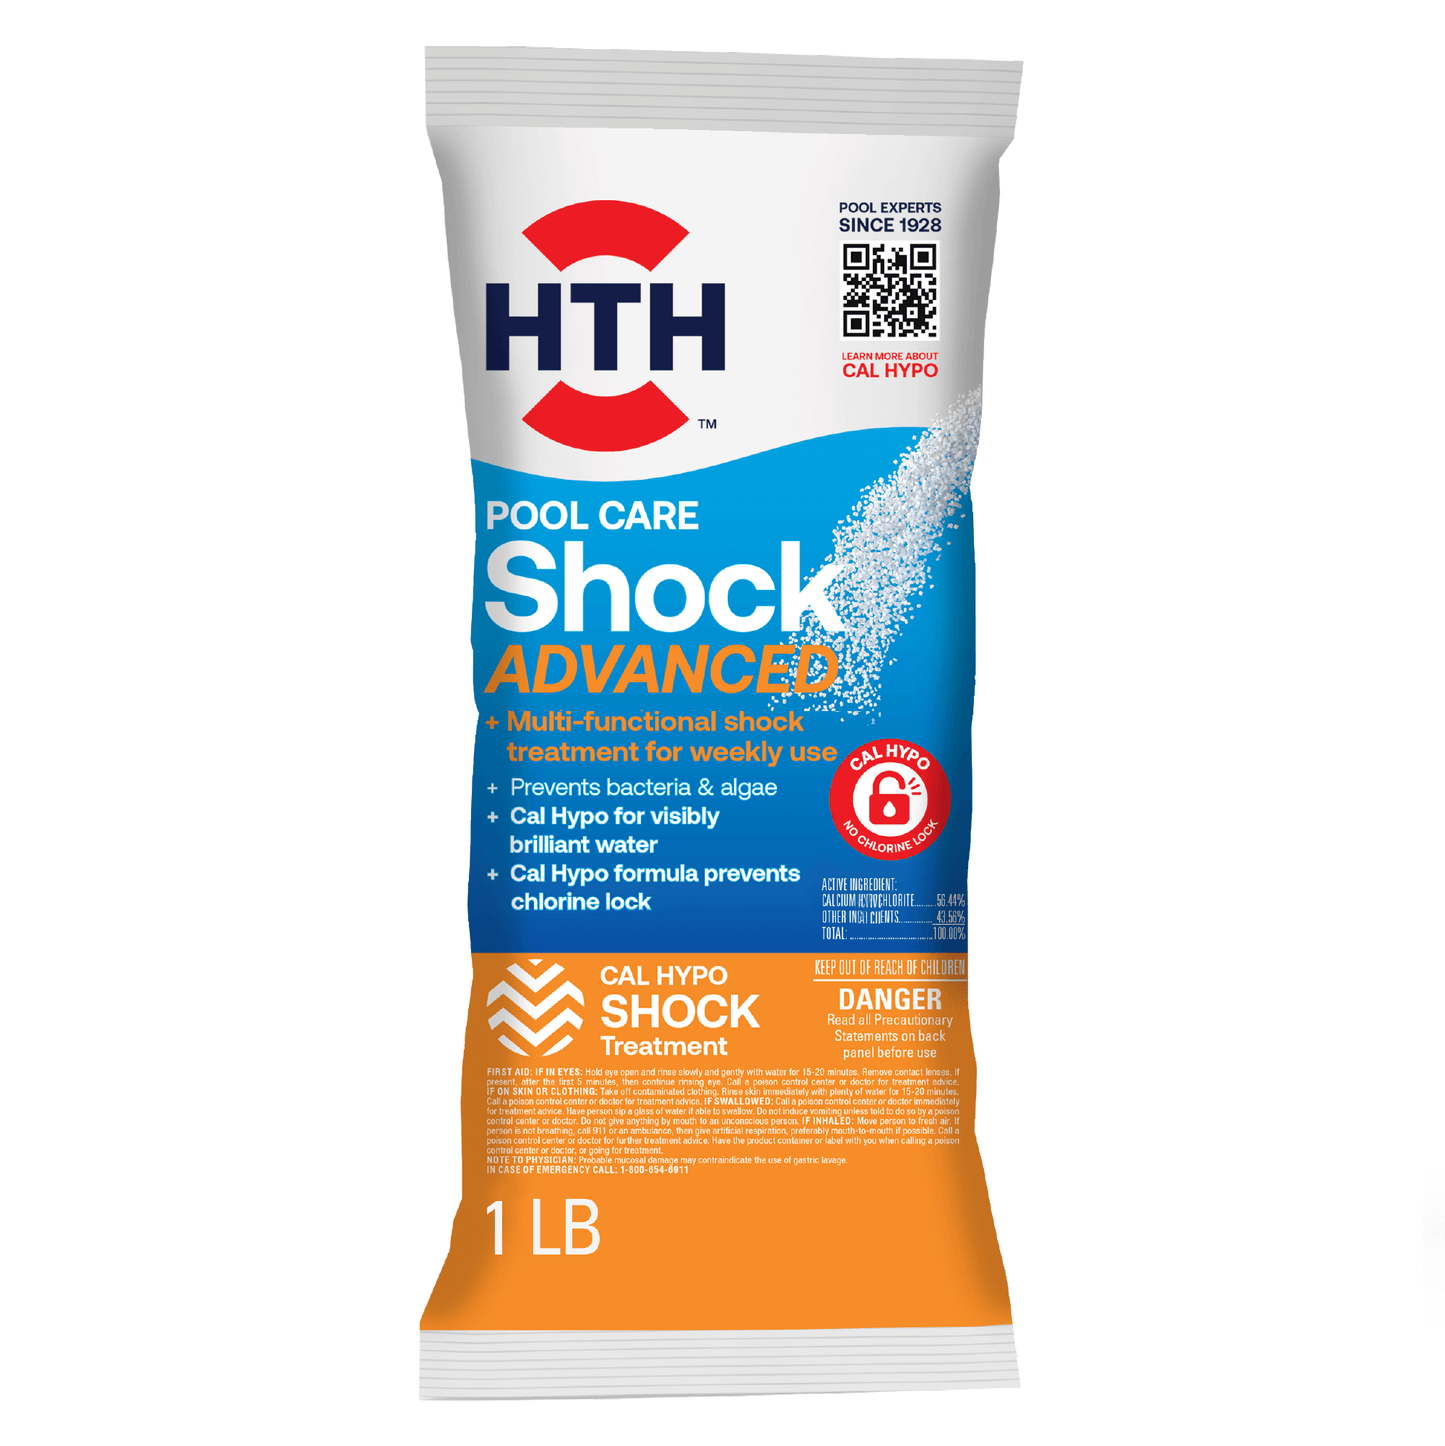 A bag of HTH Pools Shock Advanced for pool treatments